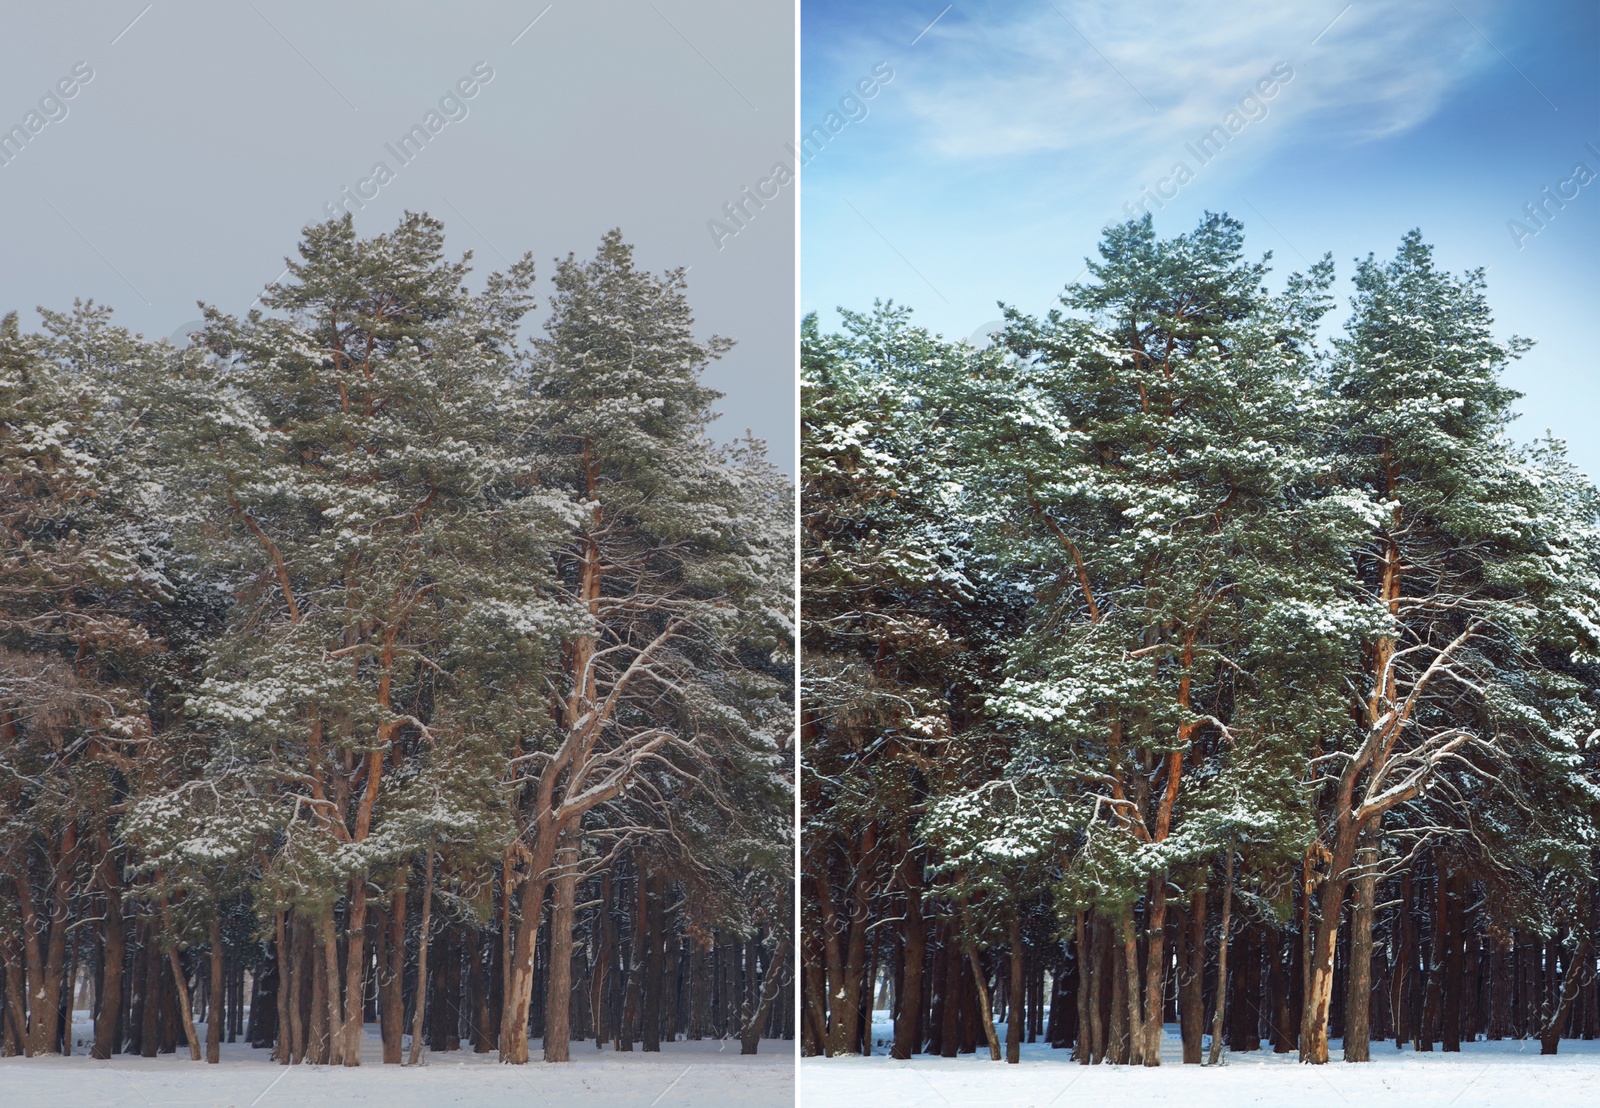 Image of Photo before and after retouch, collage. Picturesque view of beautiful forest covered with snow